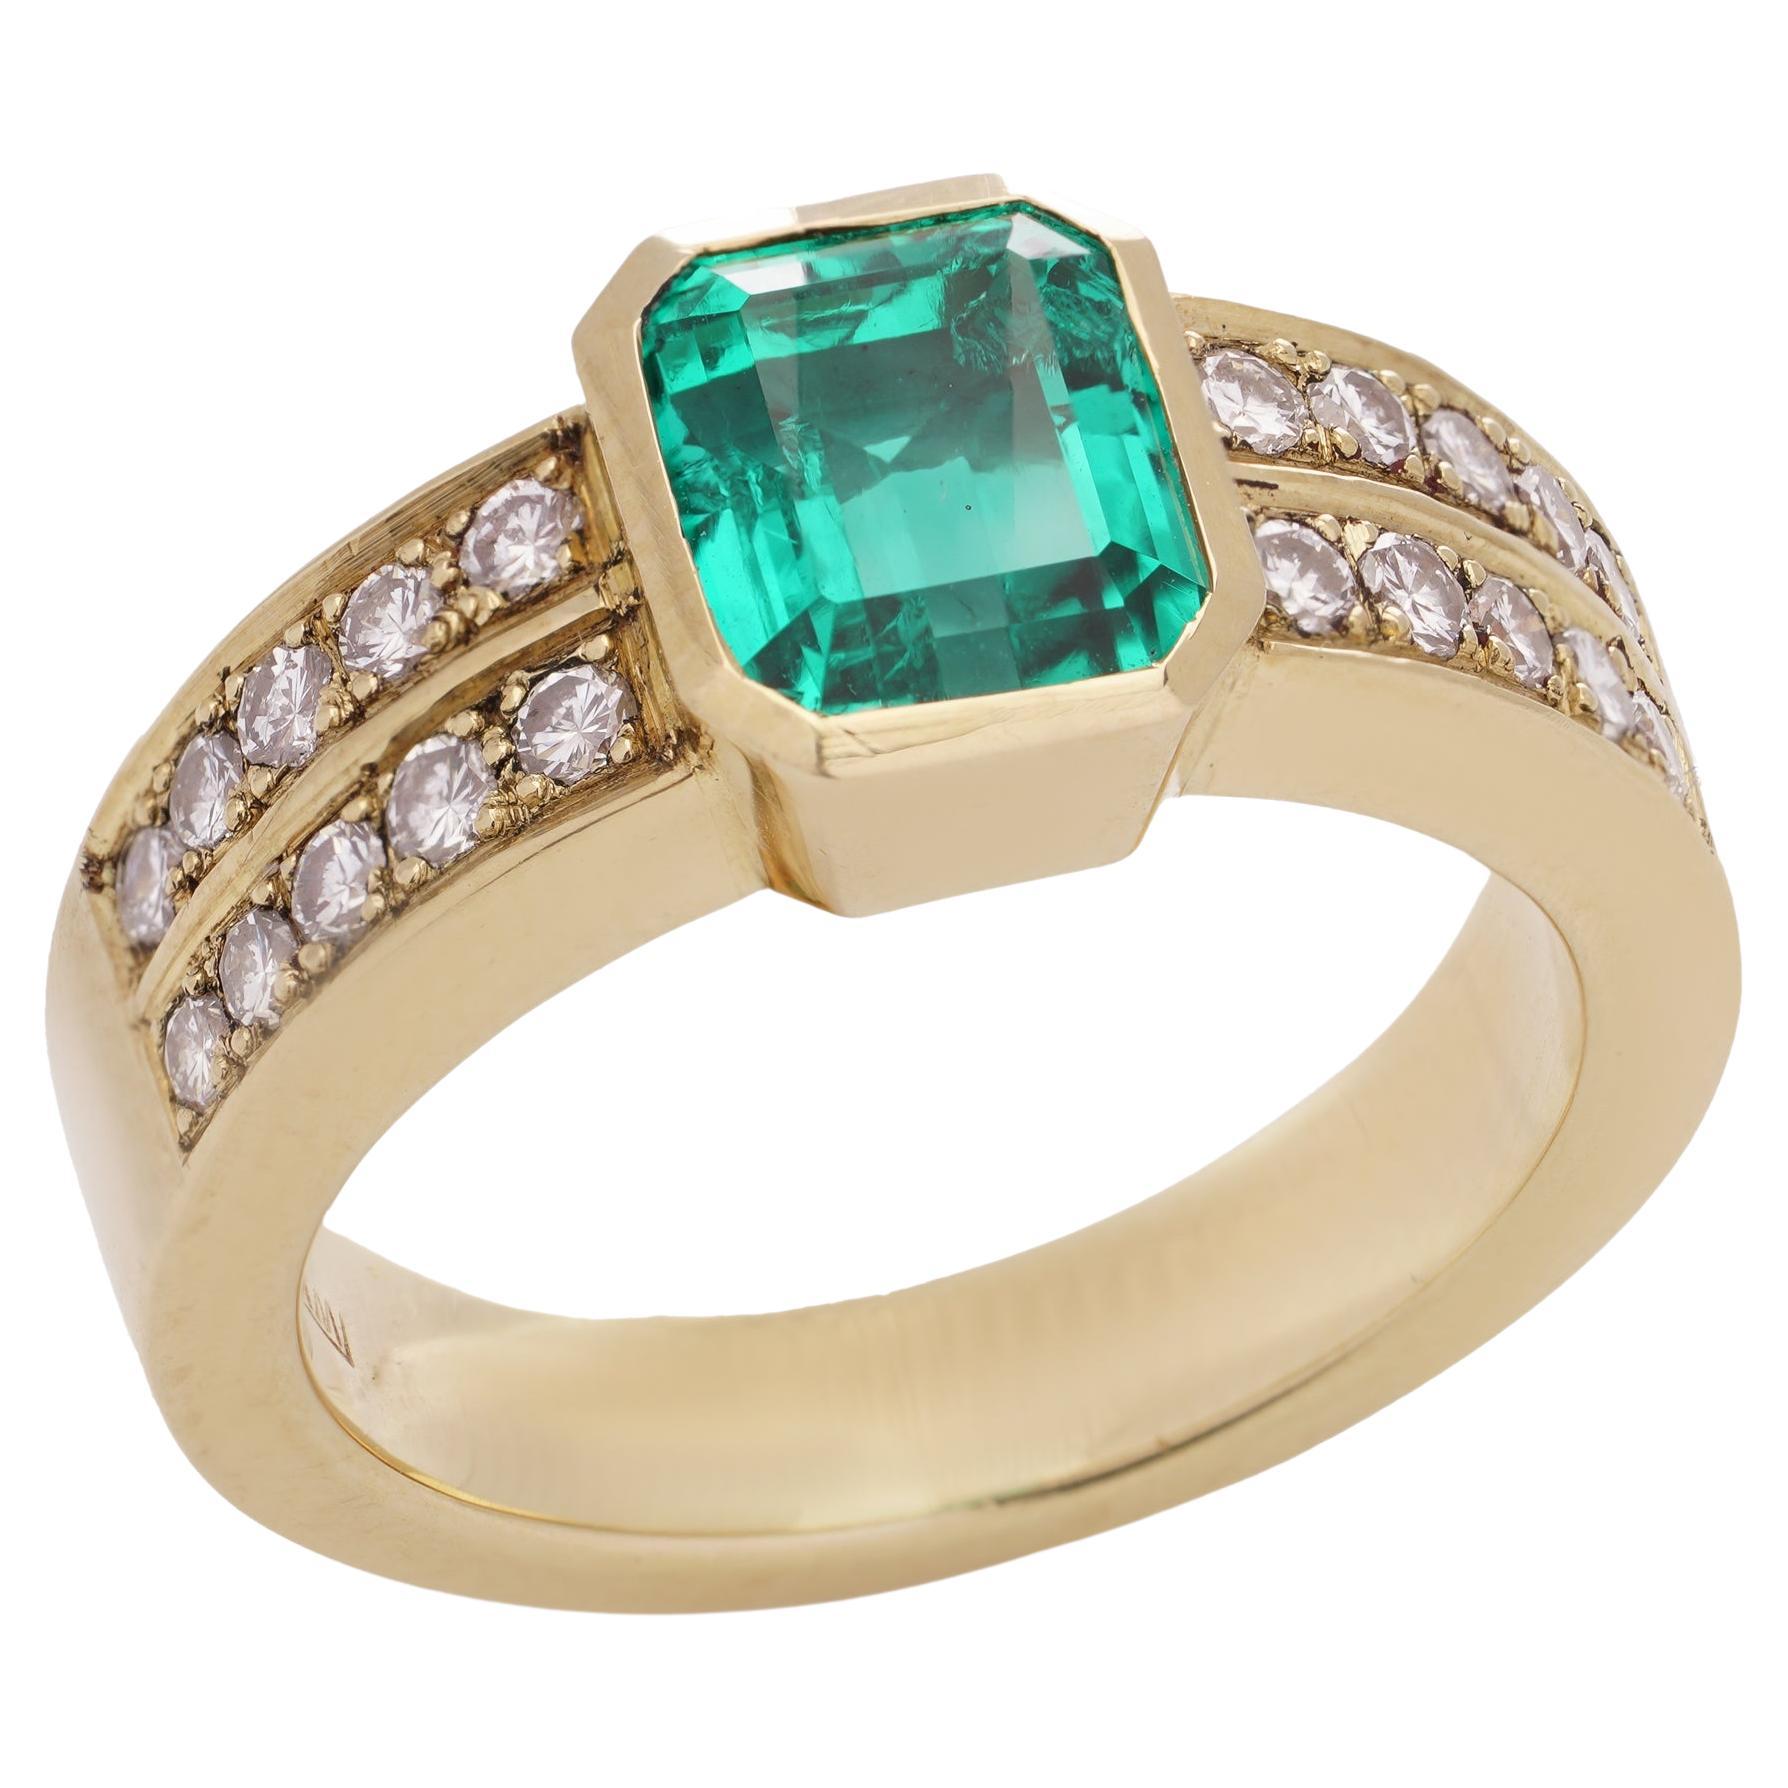 Vintage 18kt. yellow gold natural Colombian emerald ( No Oil ) and diamond ring